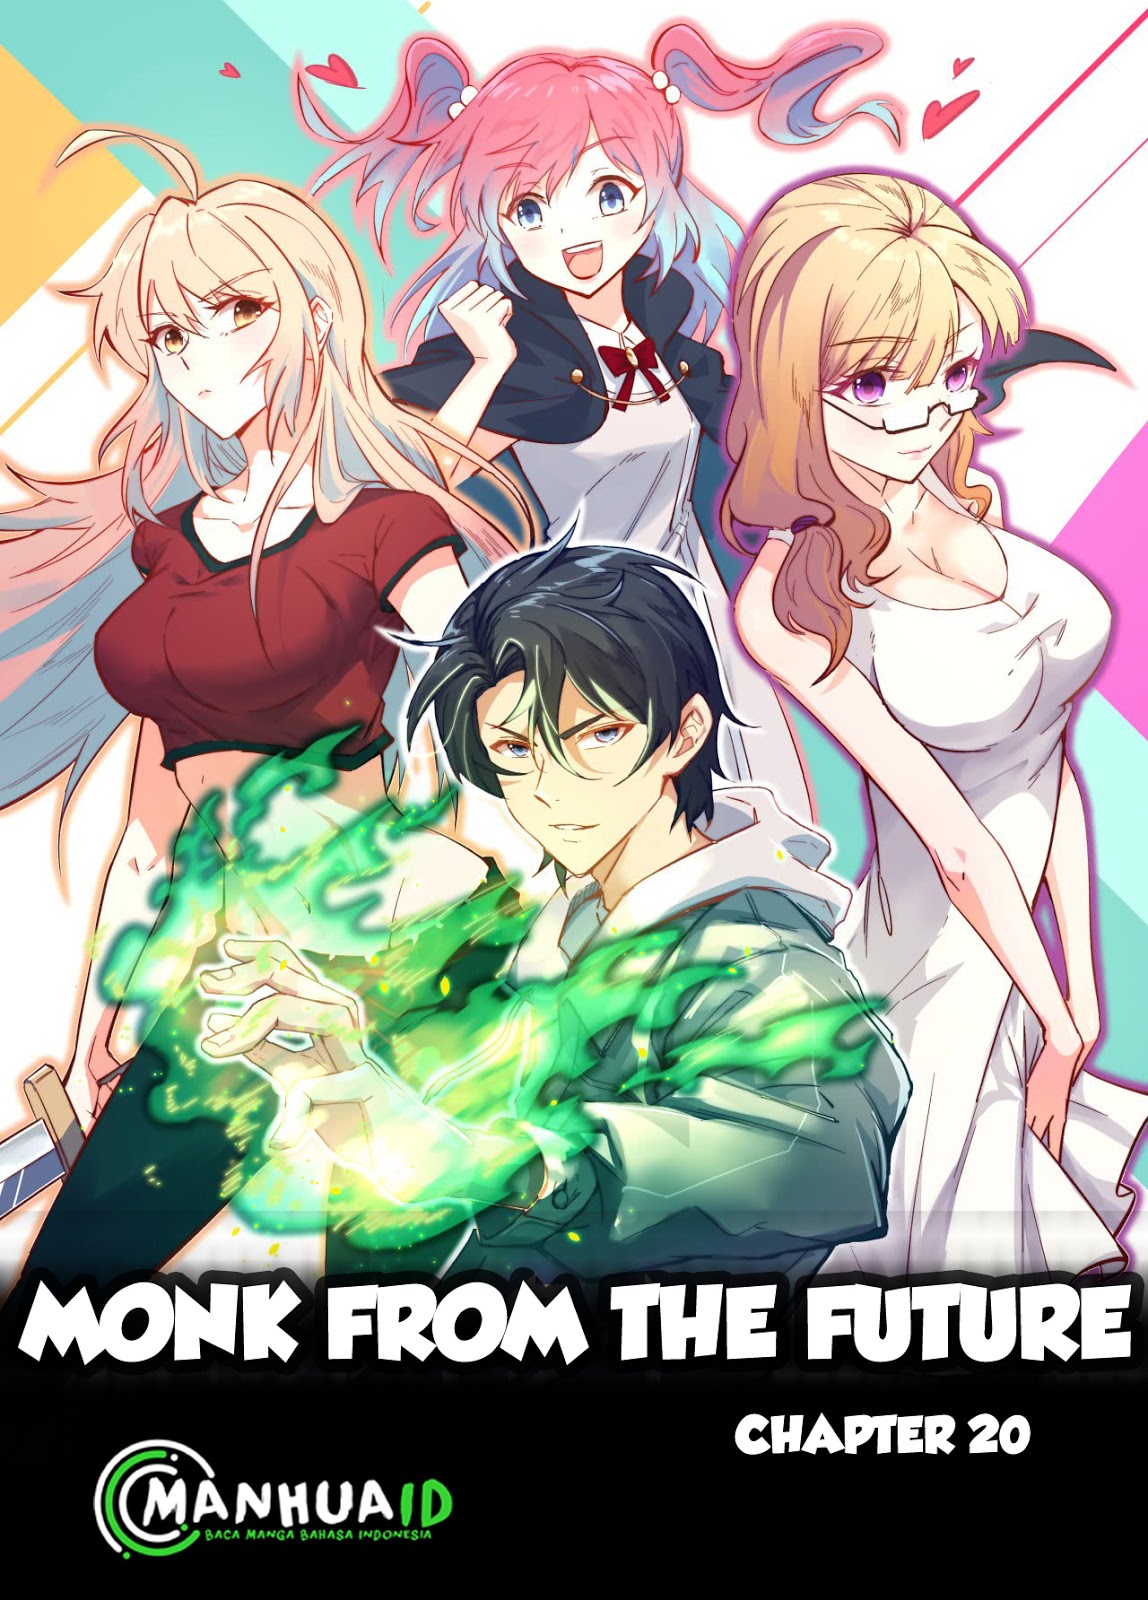 Monk From the Future Chapter 20